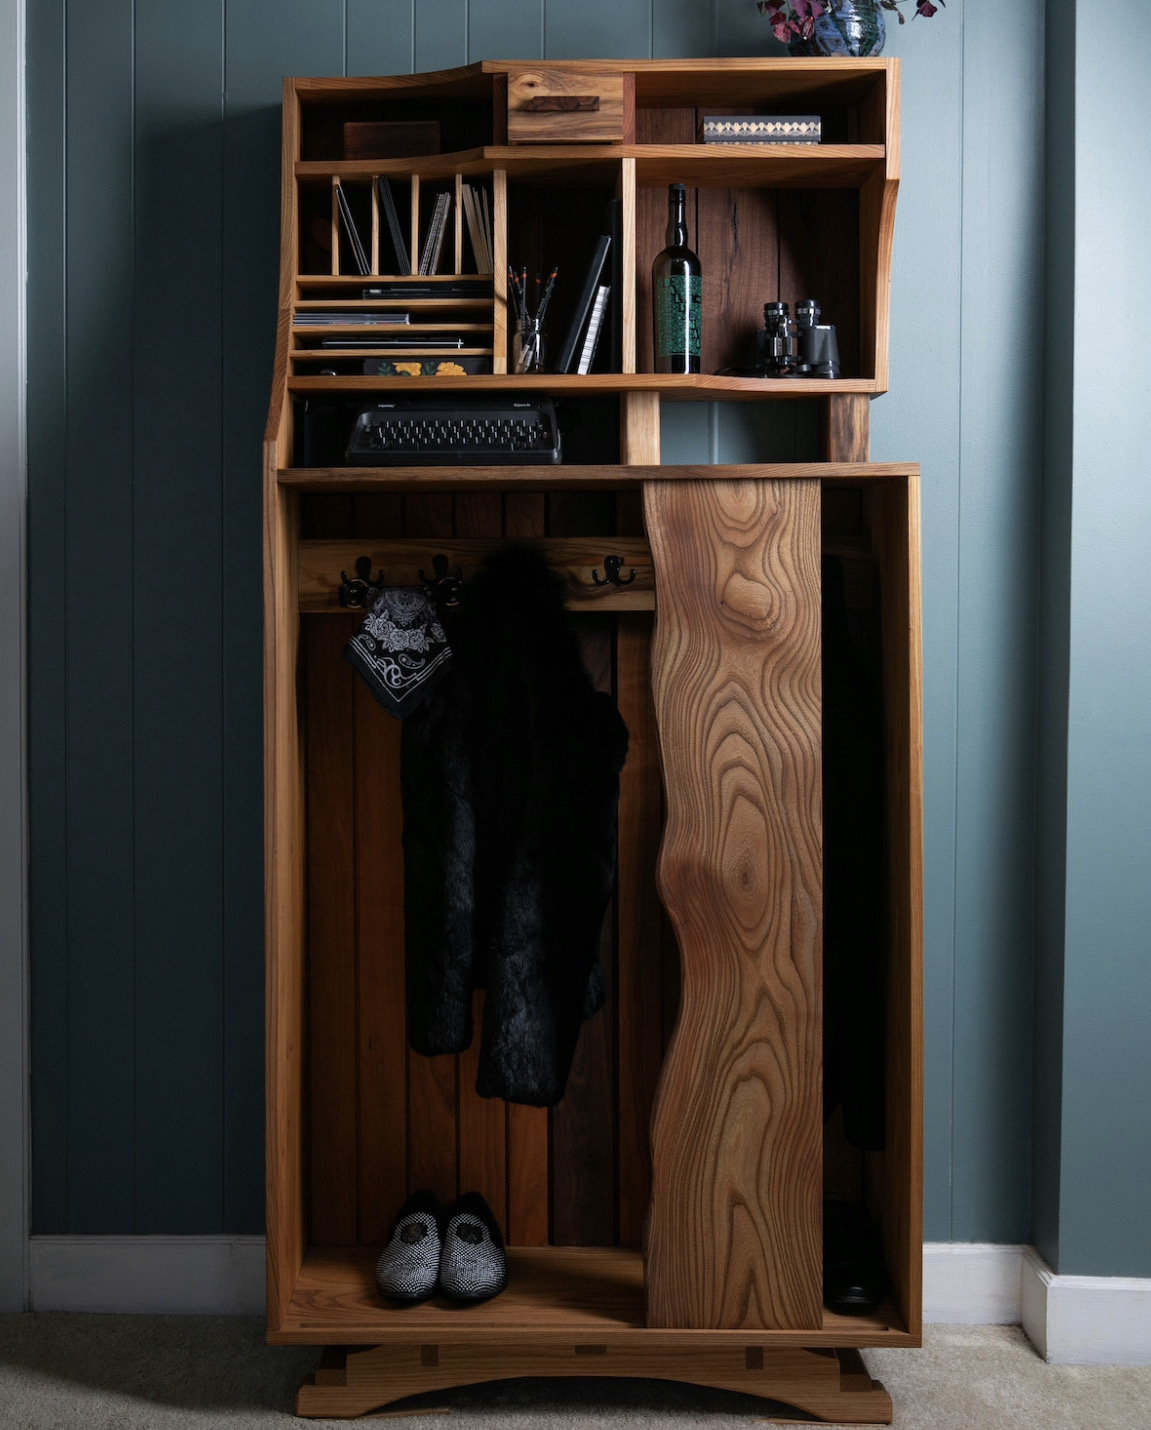 Entryway cabinet featuring a coat rack in its base and shelving in the upper portion of the piece. Personal effects are placed in furniture, such as shoes, a coat, stationary, and a typewriter.